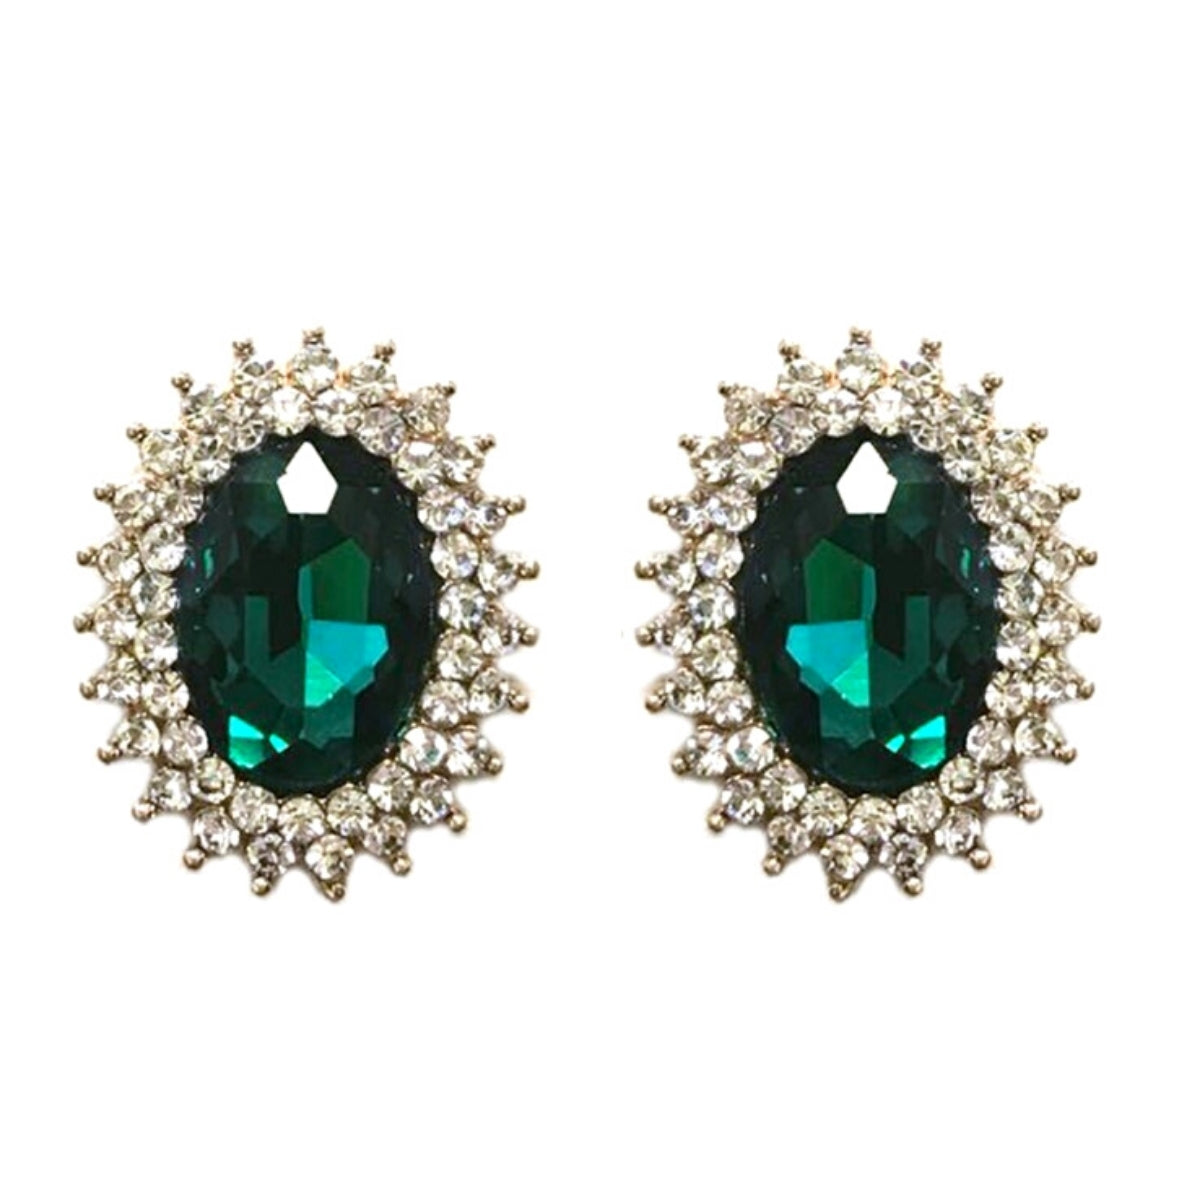 Oval Green Crystal Studs